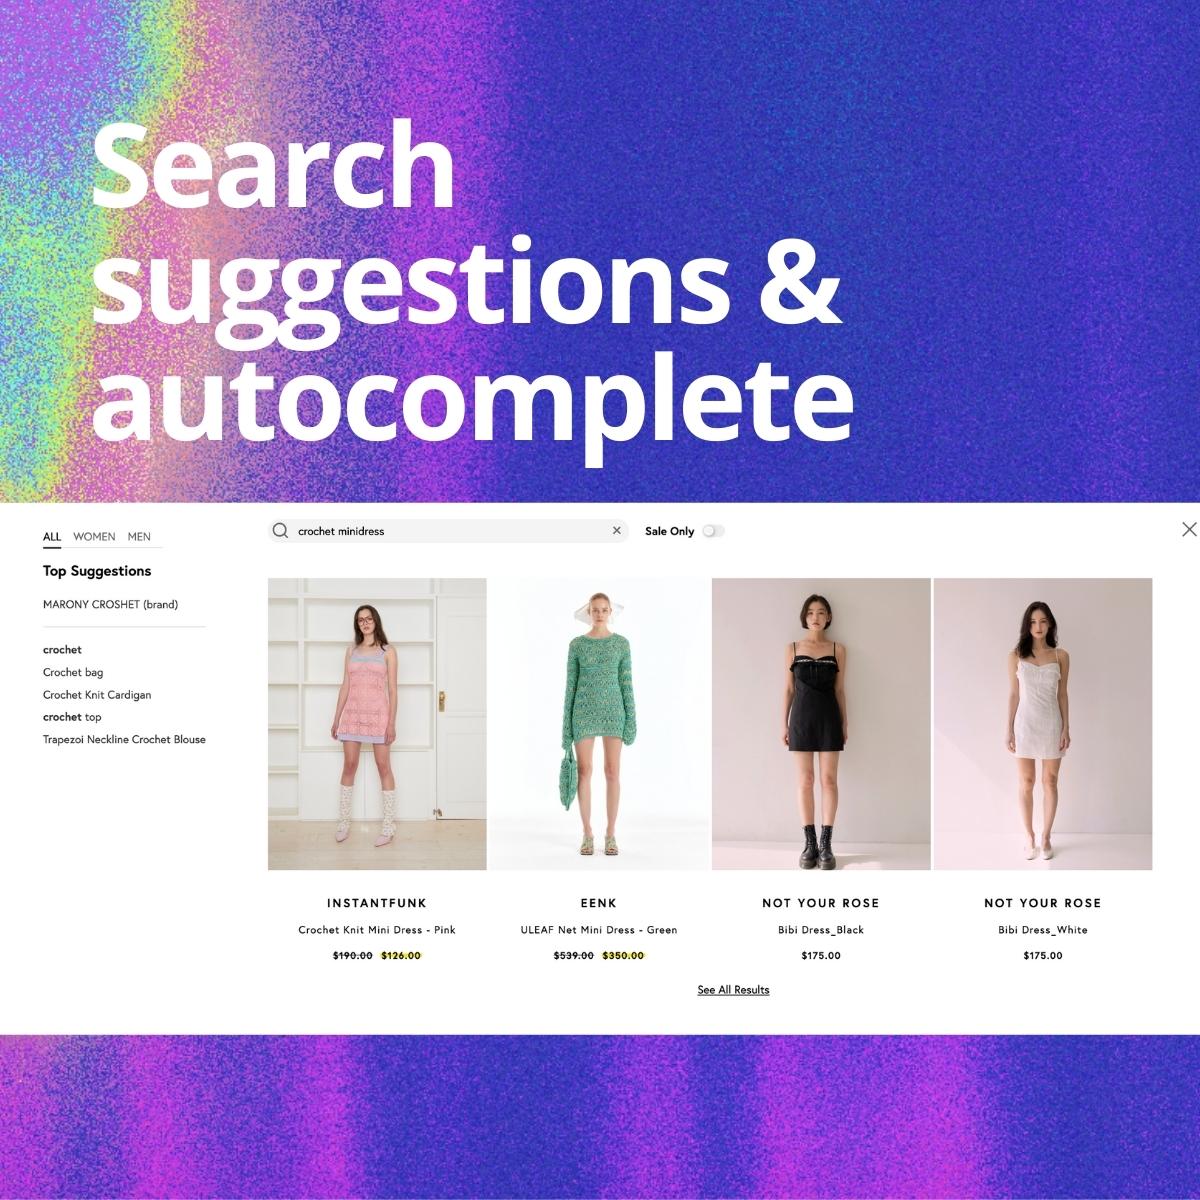 Enhanced text search using AI helps the Ecommerce discovery journey